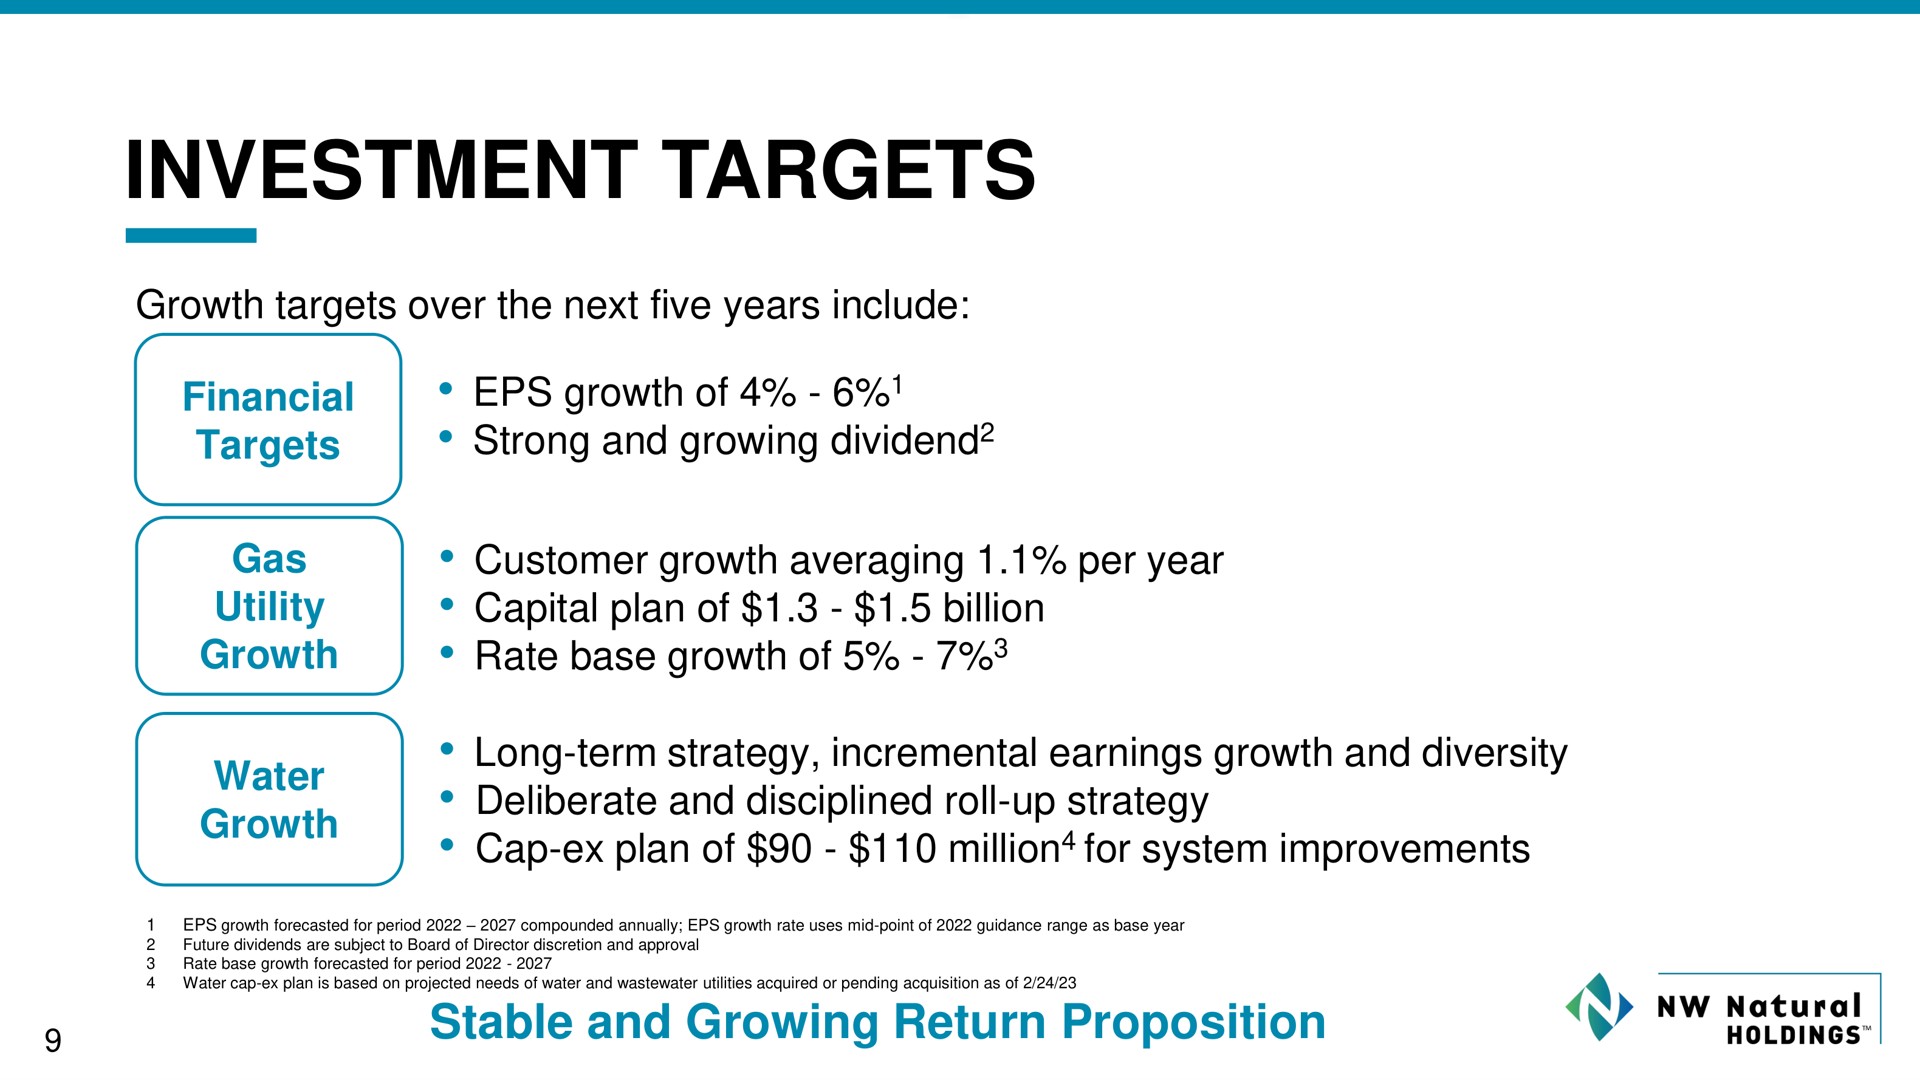 investment targets | NW Natural Holdings